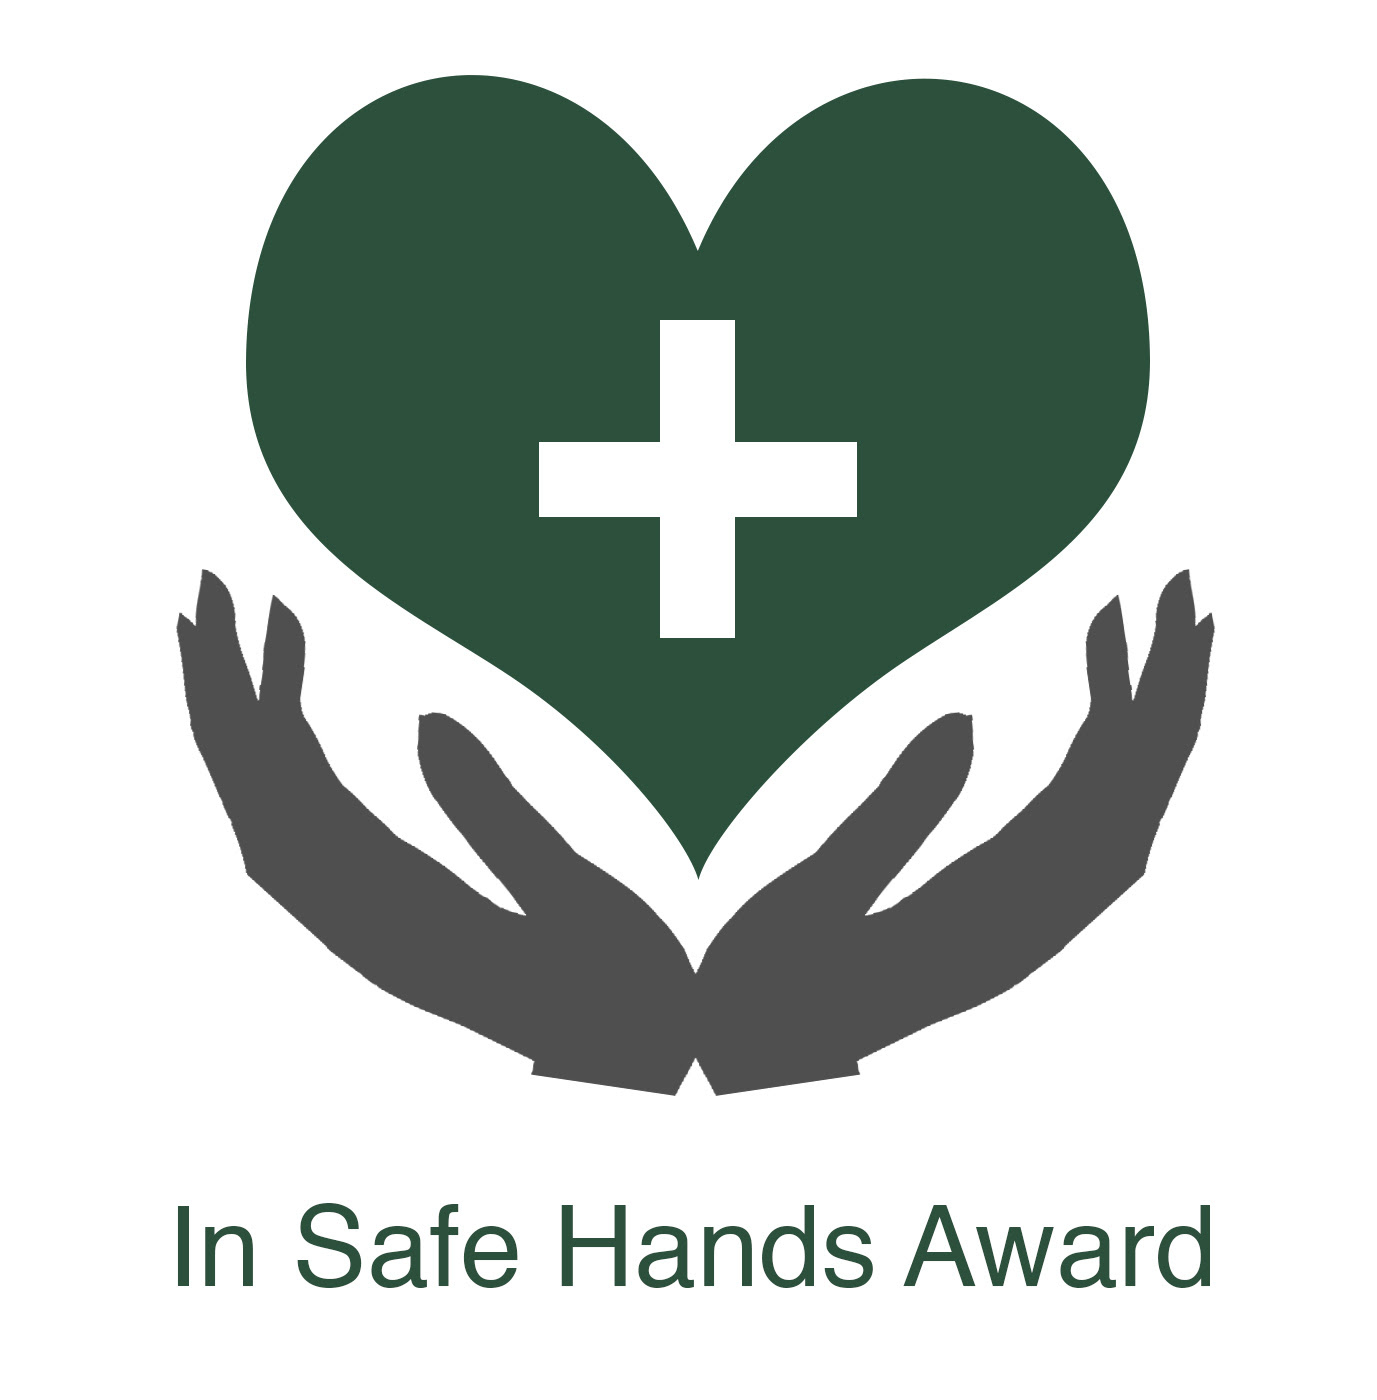 In Safe Hands Award | First Aid Training